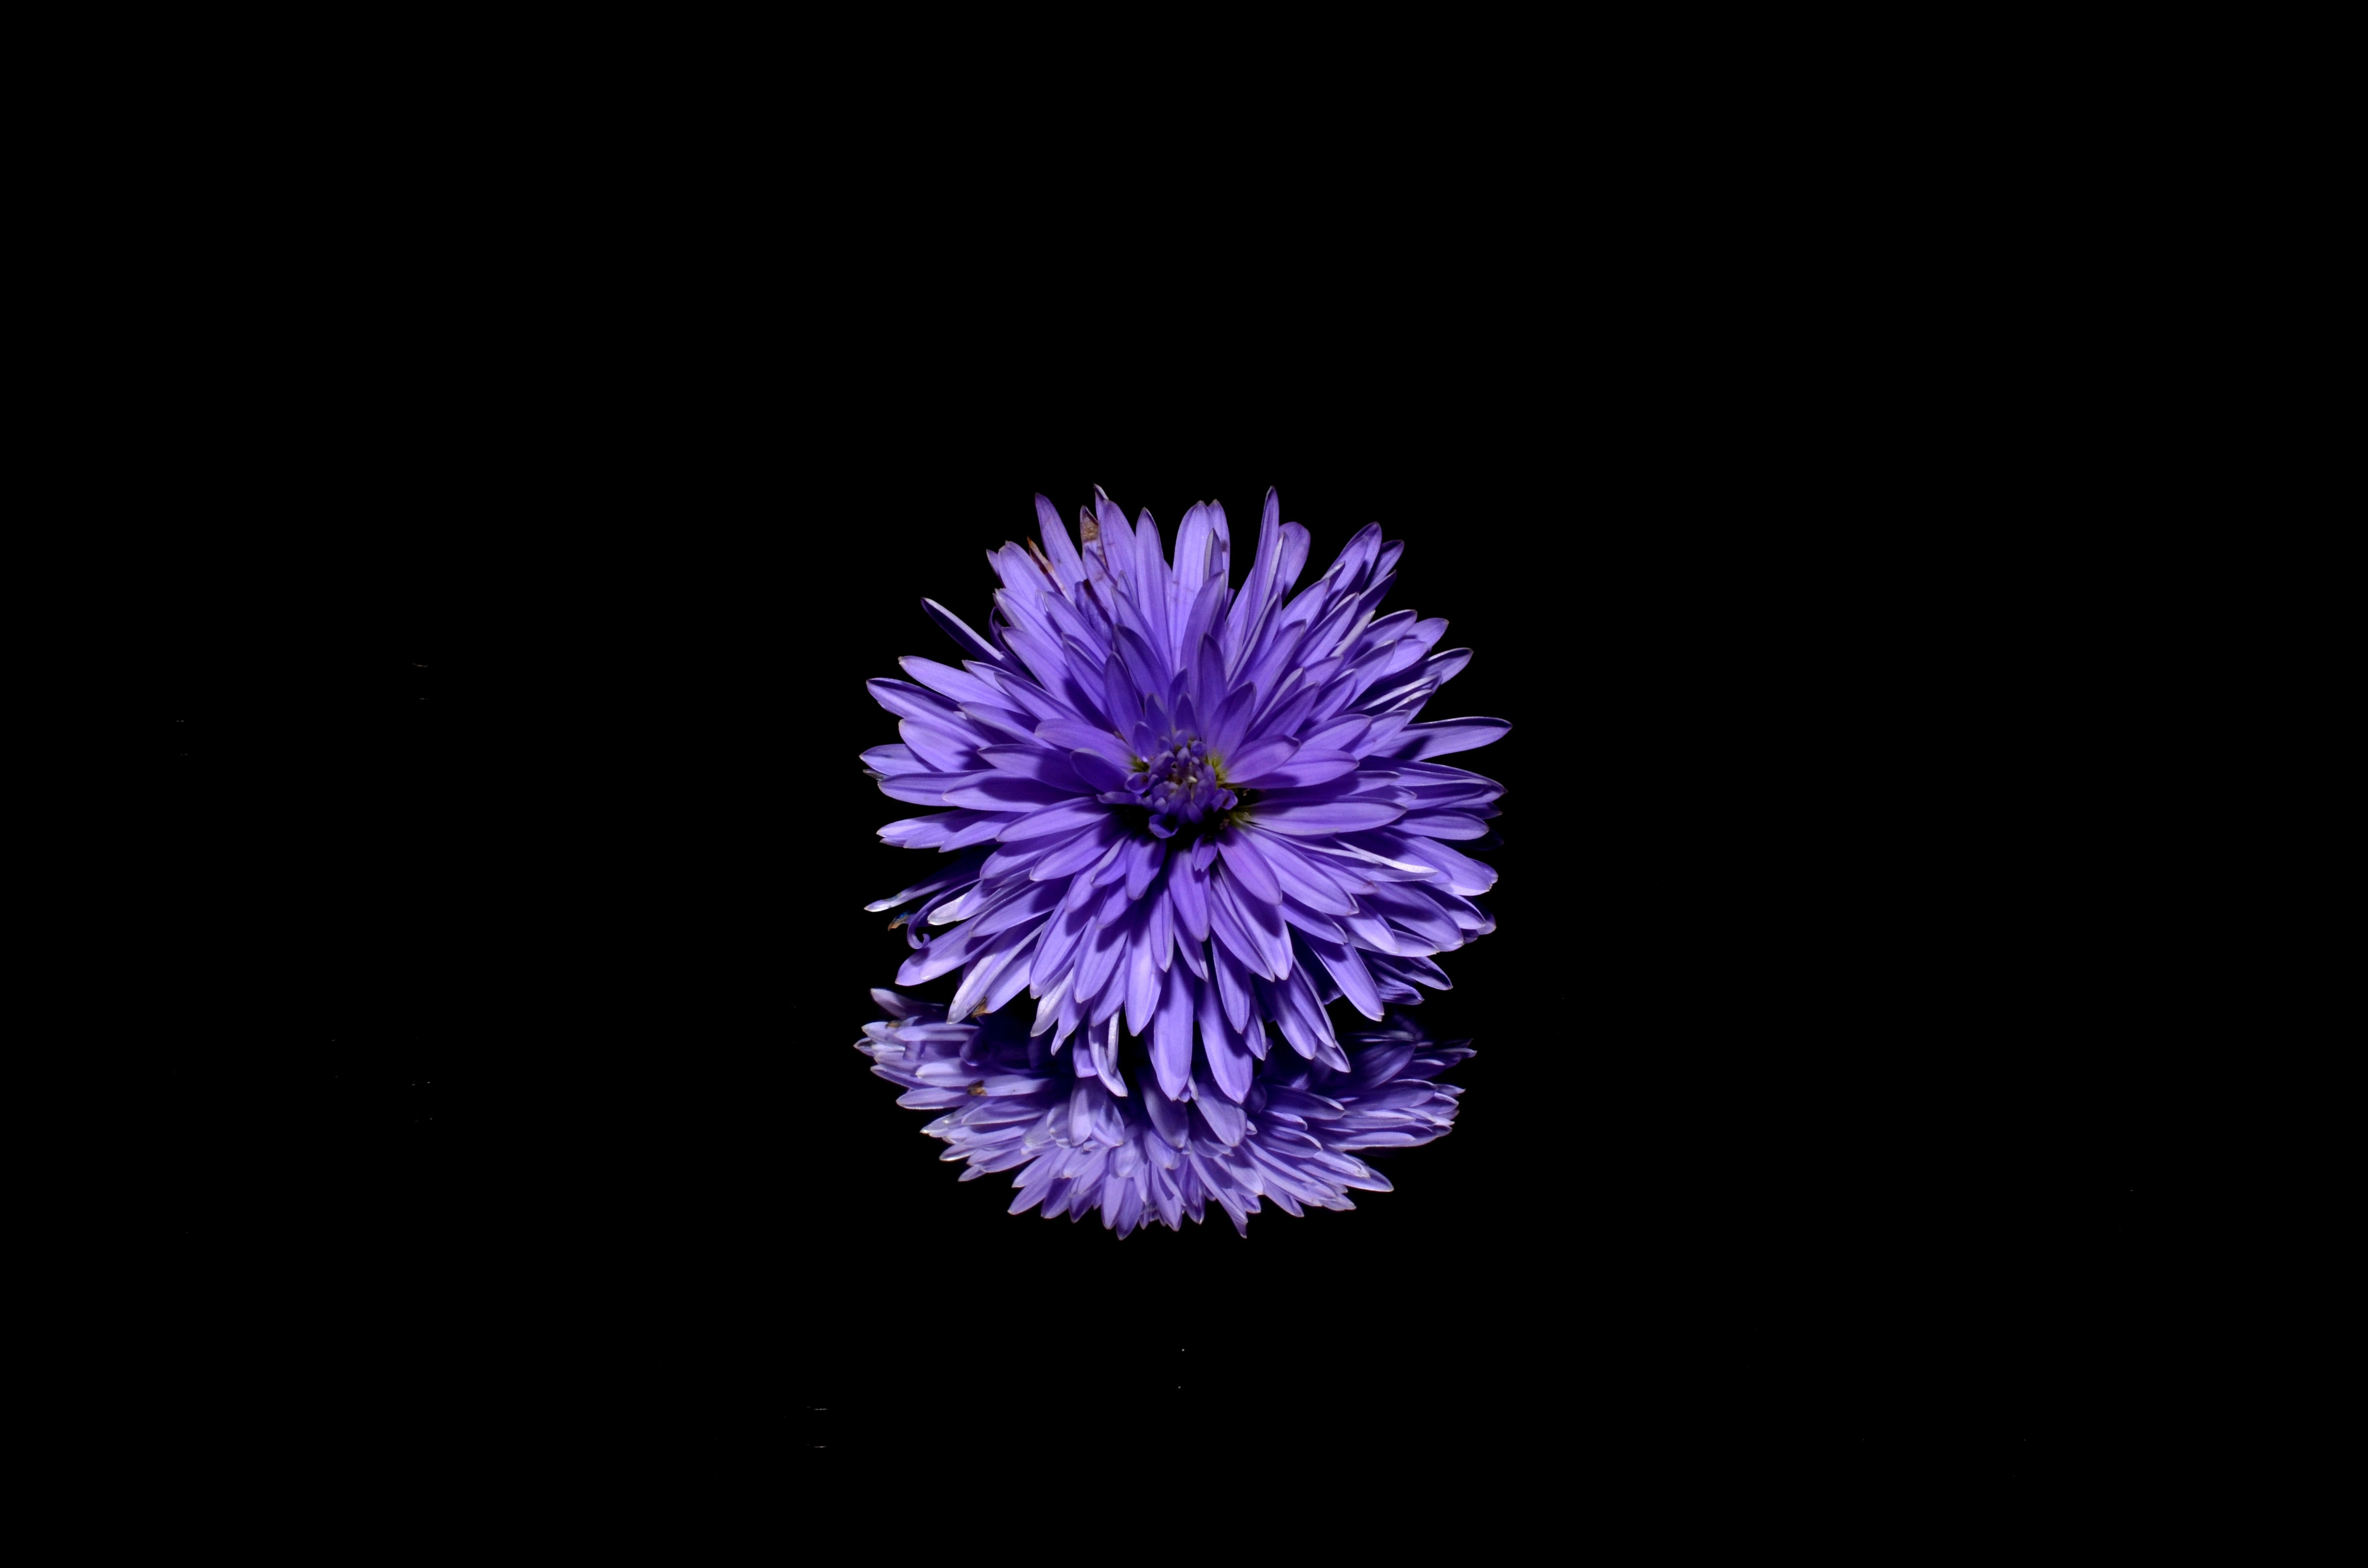 Wallpaper Purple and White Flower in Black Background, Background -  Download Free Image